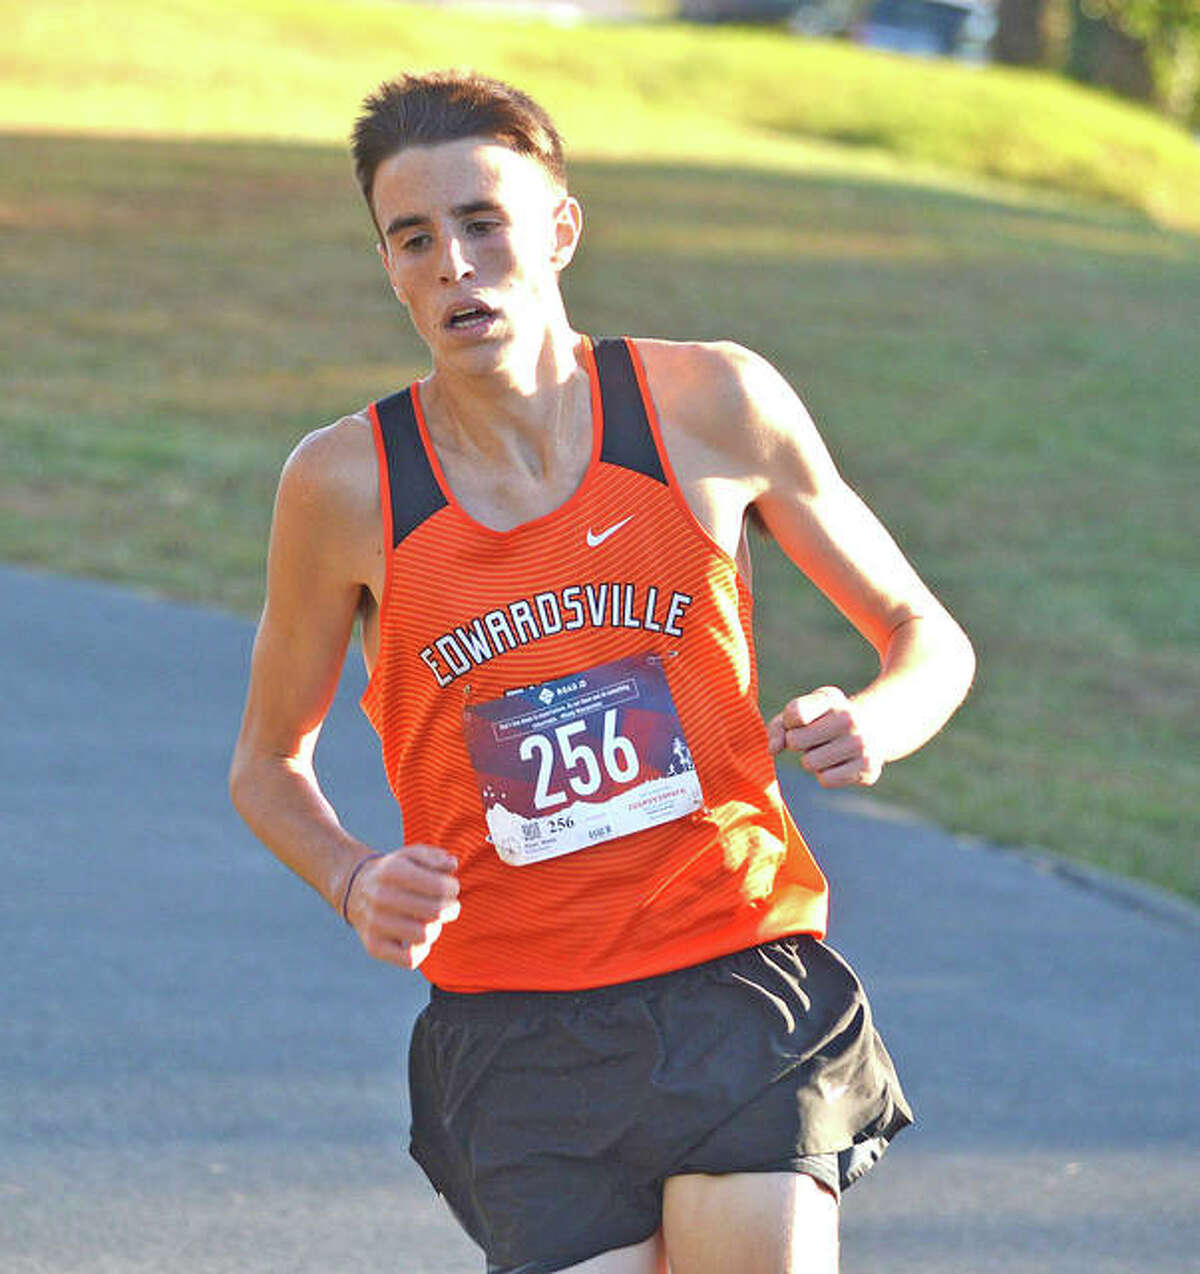 Edwardsville’s Ryan Watts runs last year in the Madison County Large School Meet at Belk Park in Wood River.